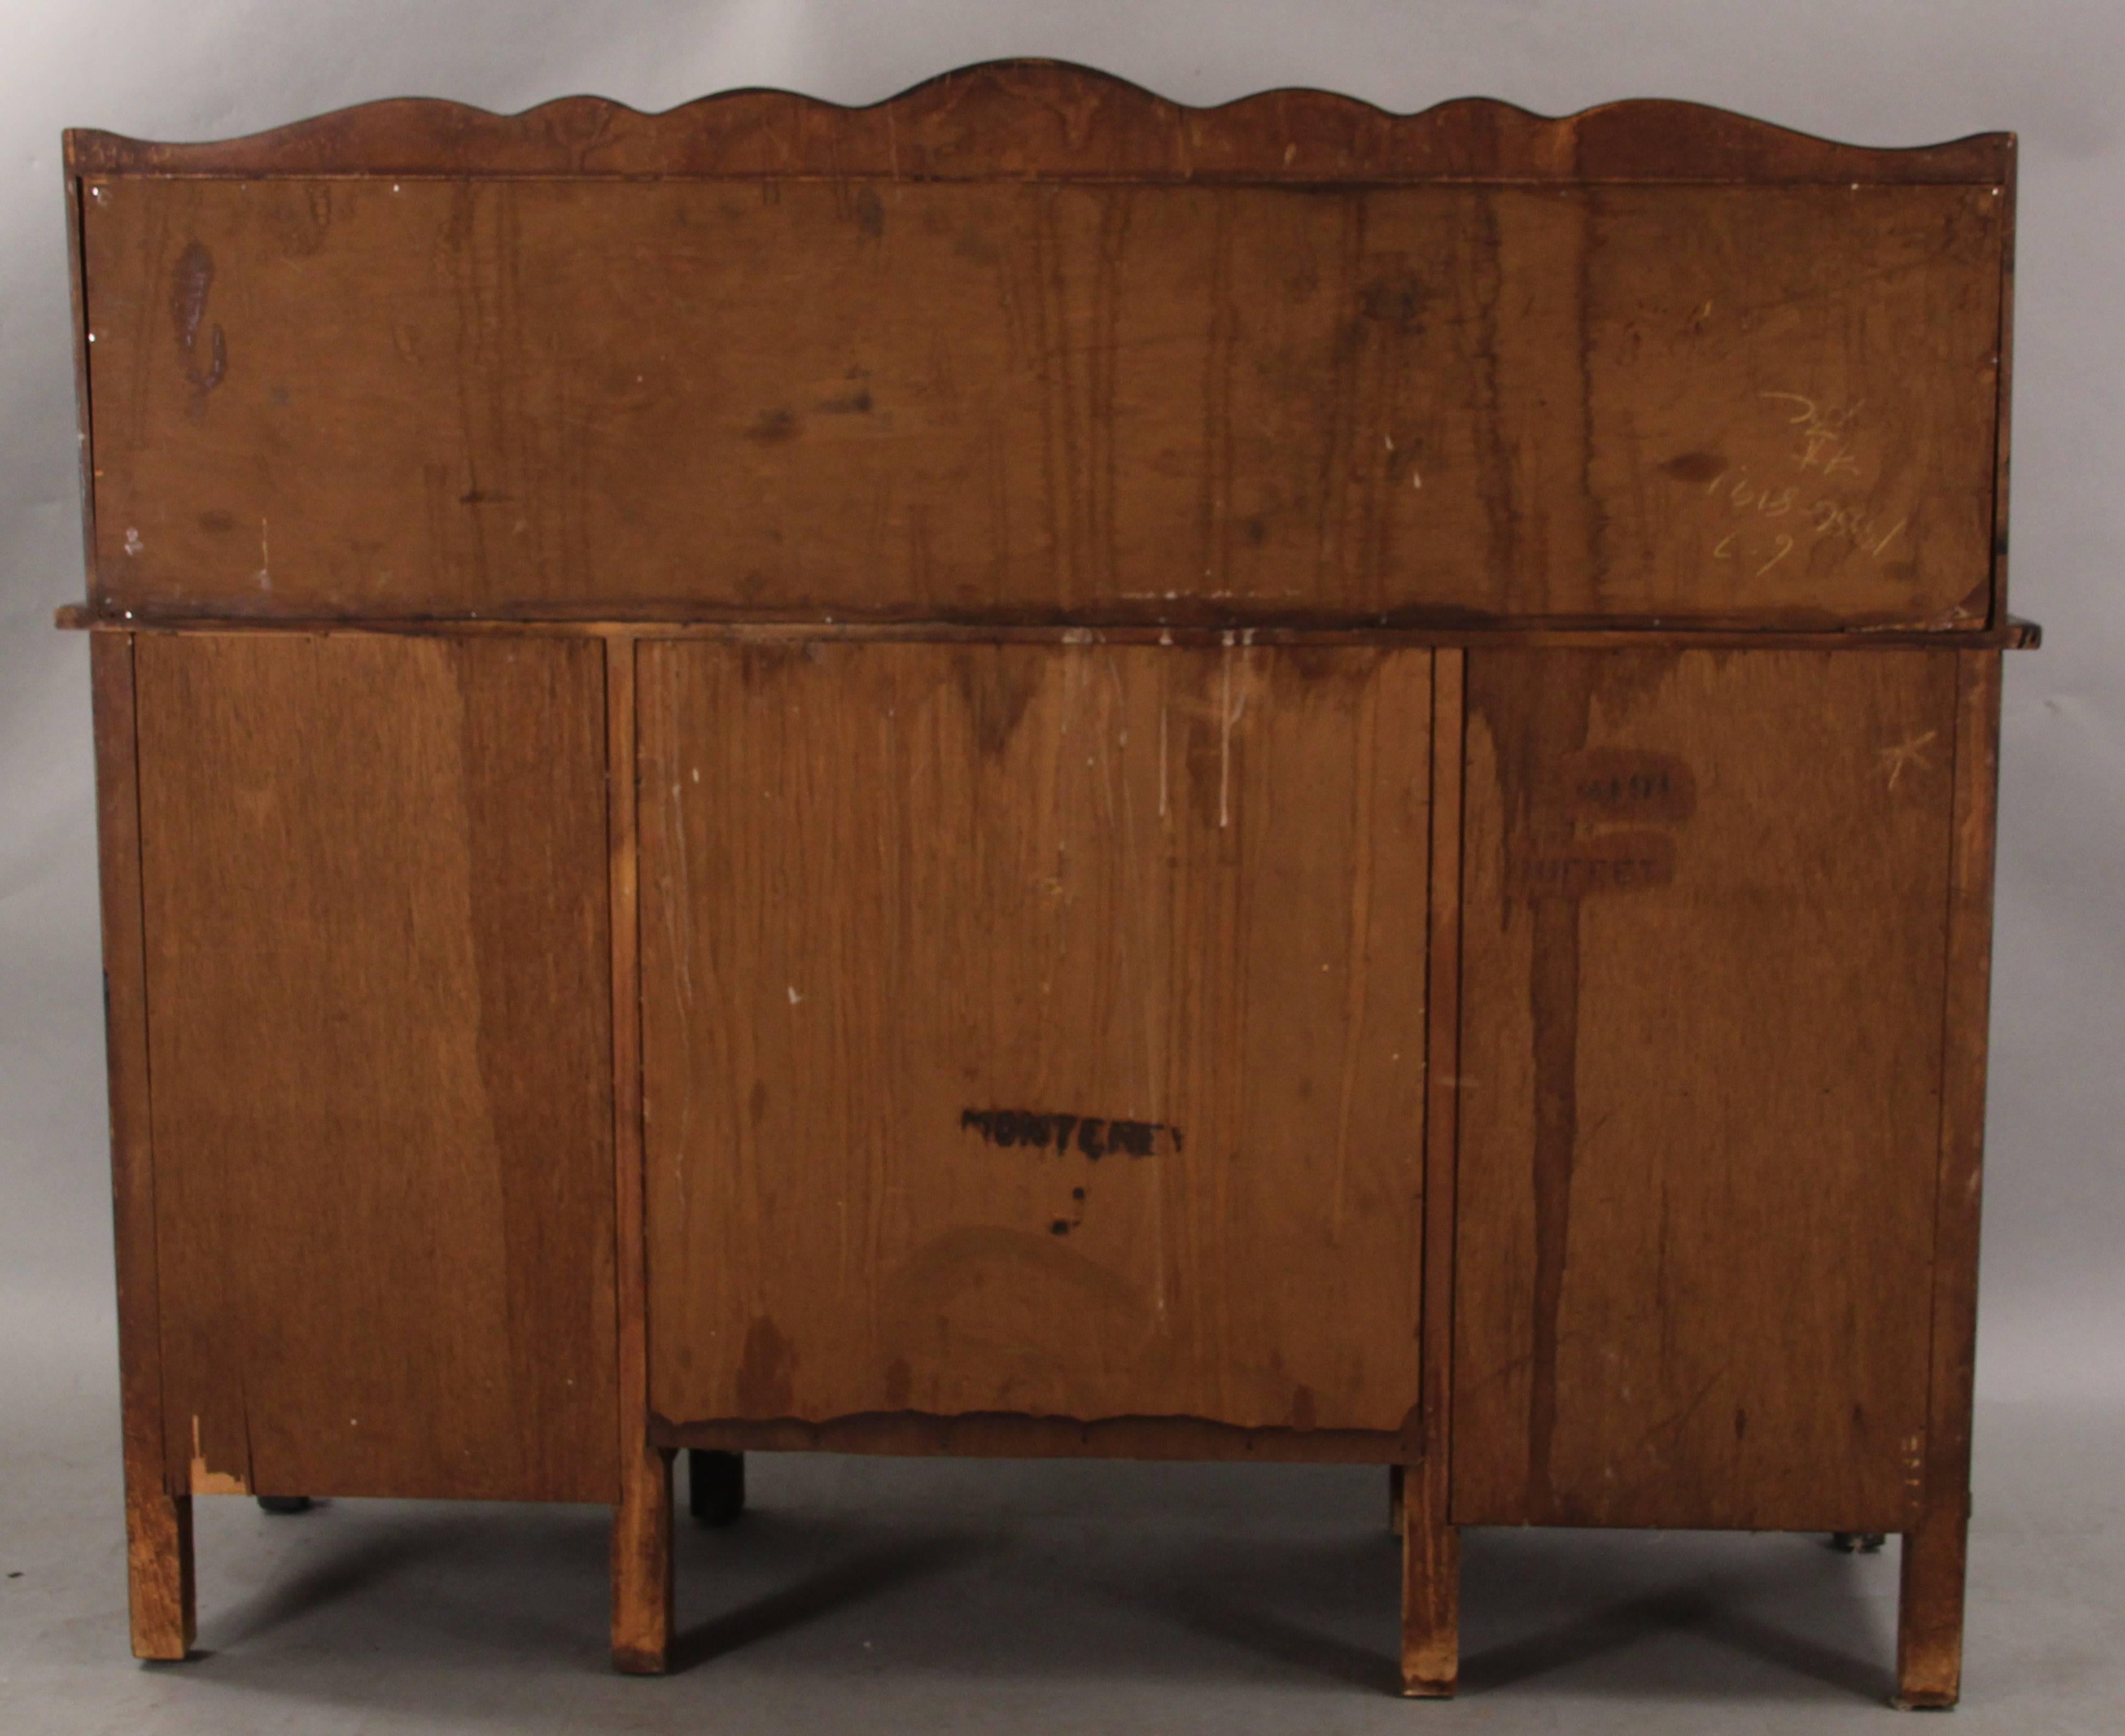 Mid-20th Century Antique Signed Monterey Sideboard with Old Wood Finish and Iron Hardware